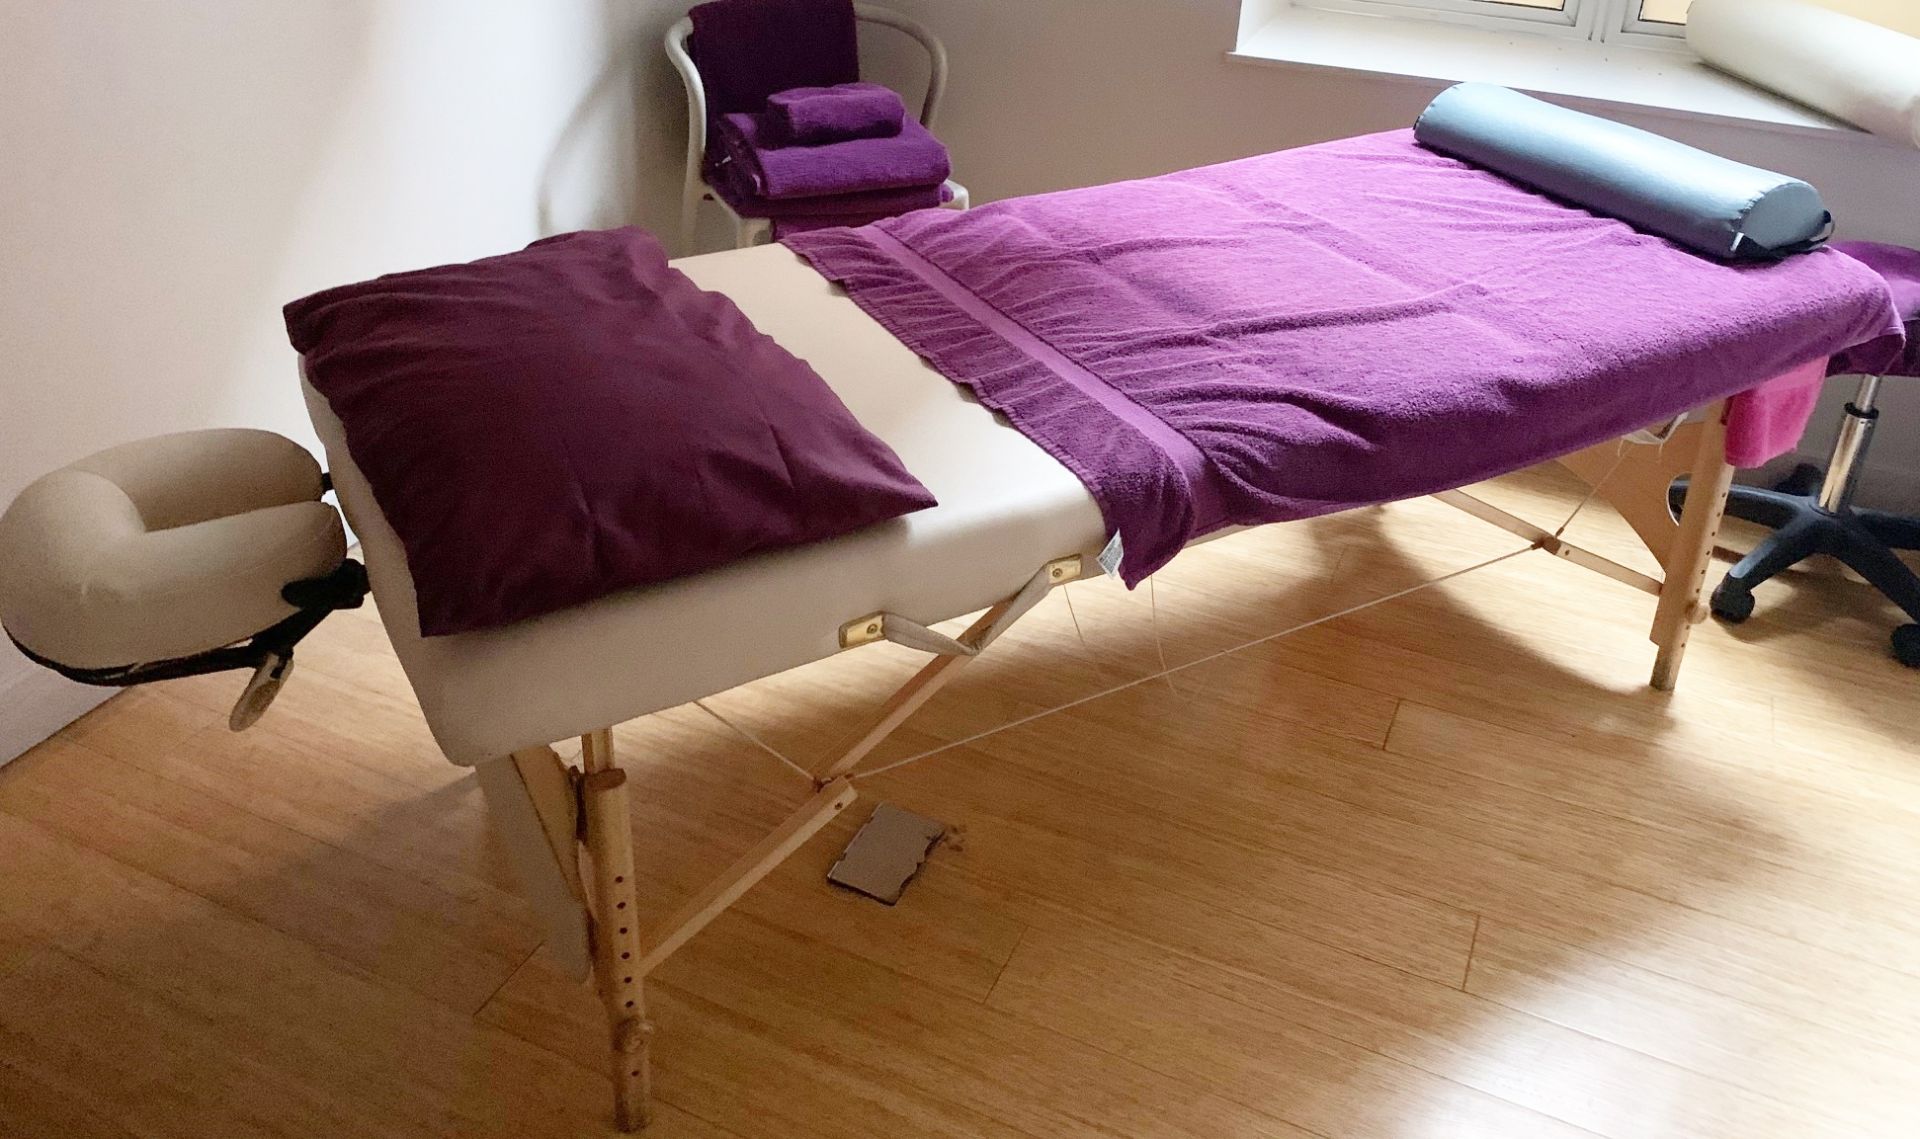 1 x Oakworks Clinician Manual Massage Table - Supplied With Headrest - CL587 - Location: London - Image 2 of 3